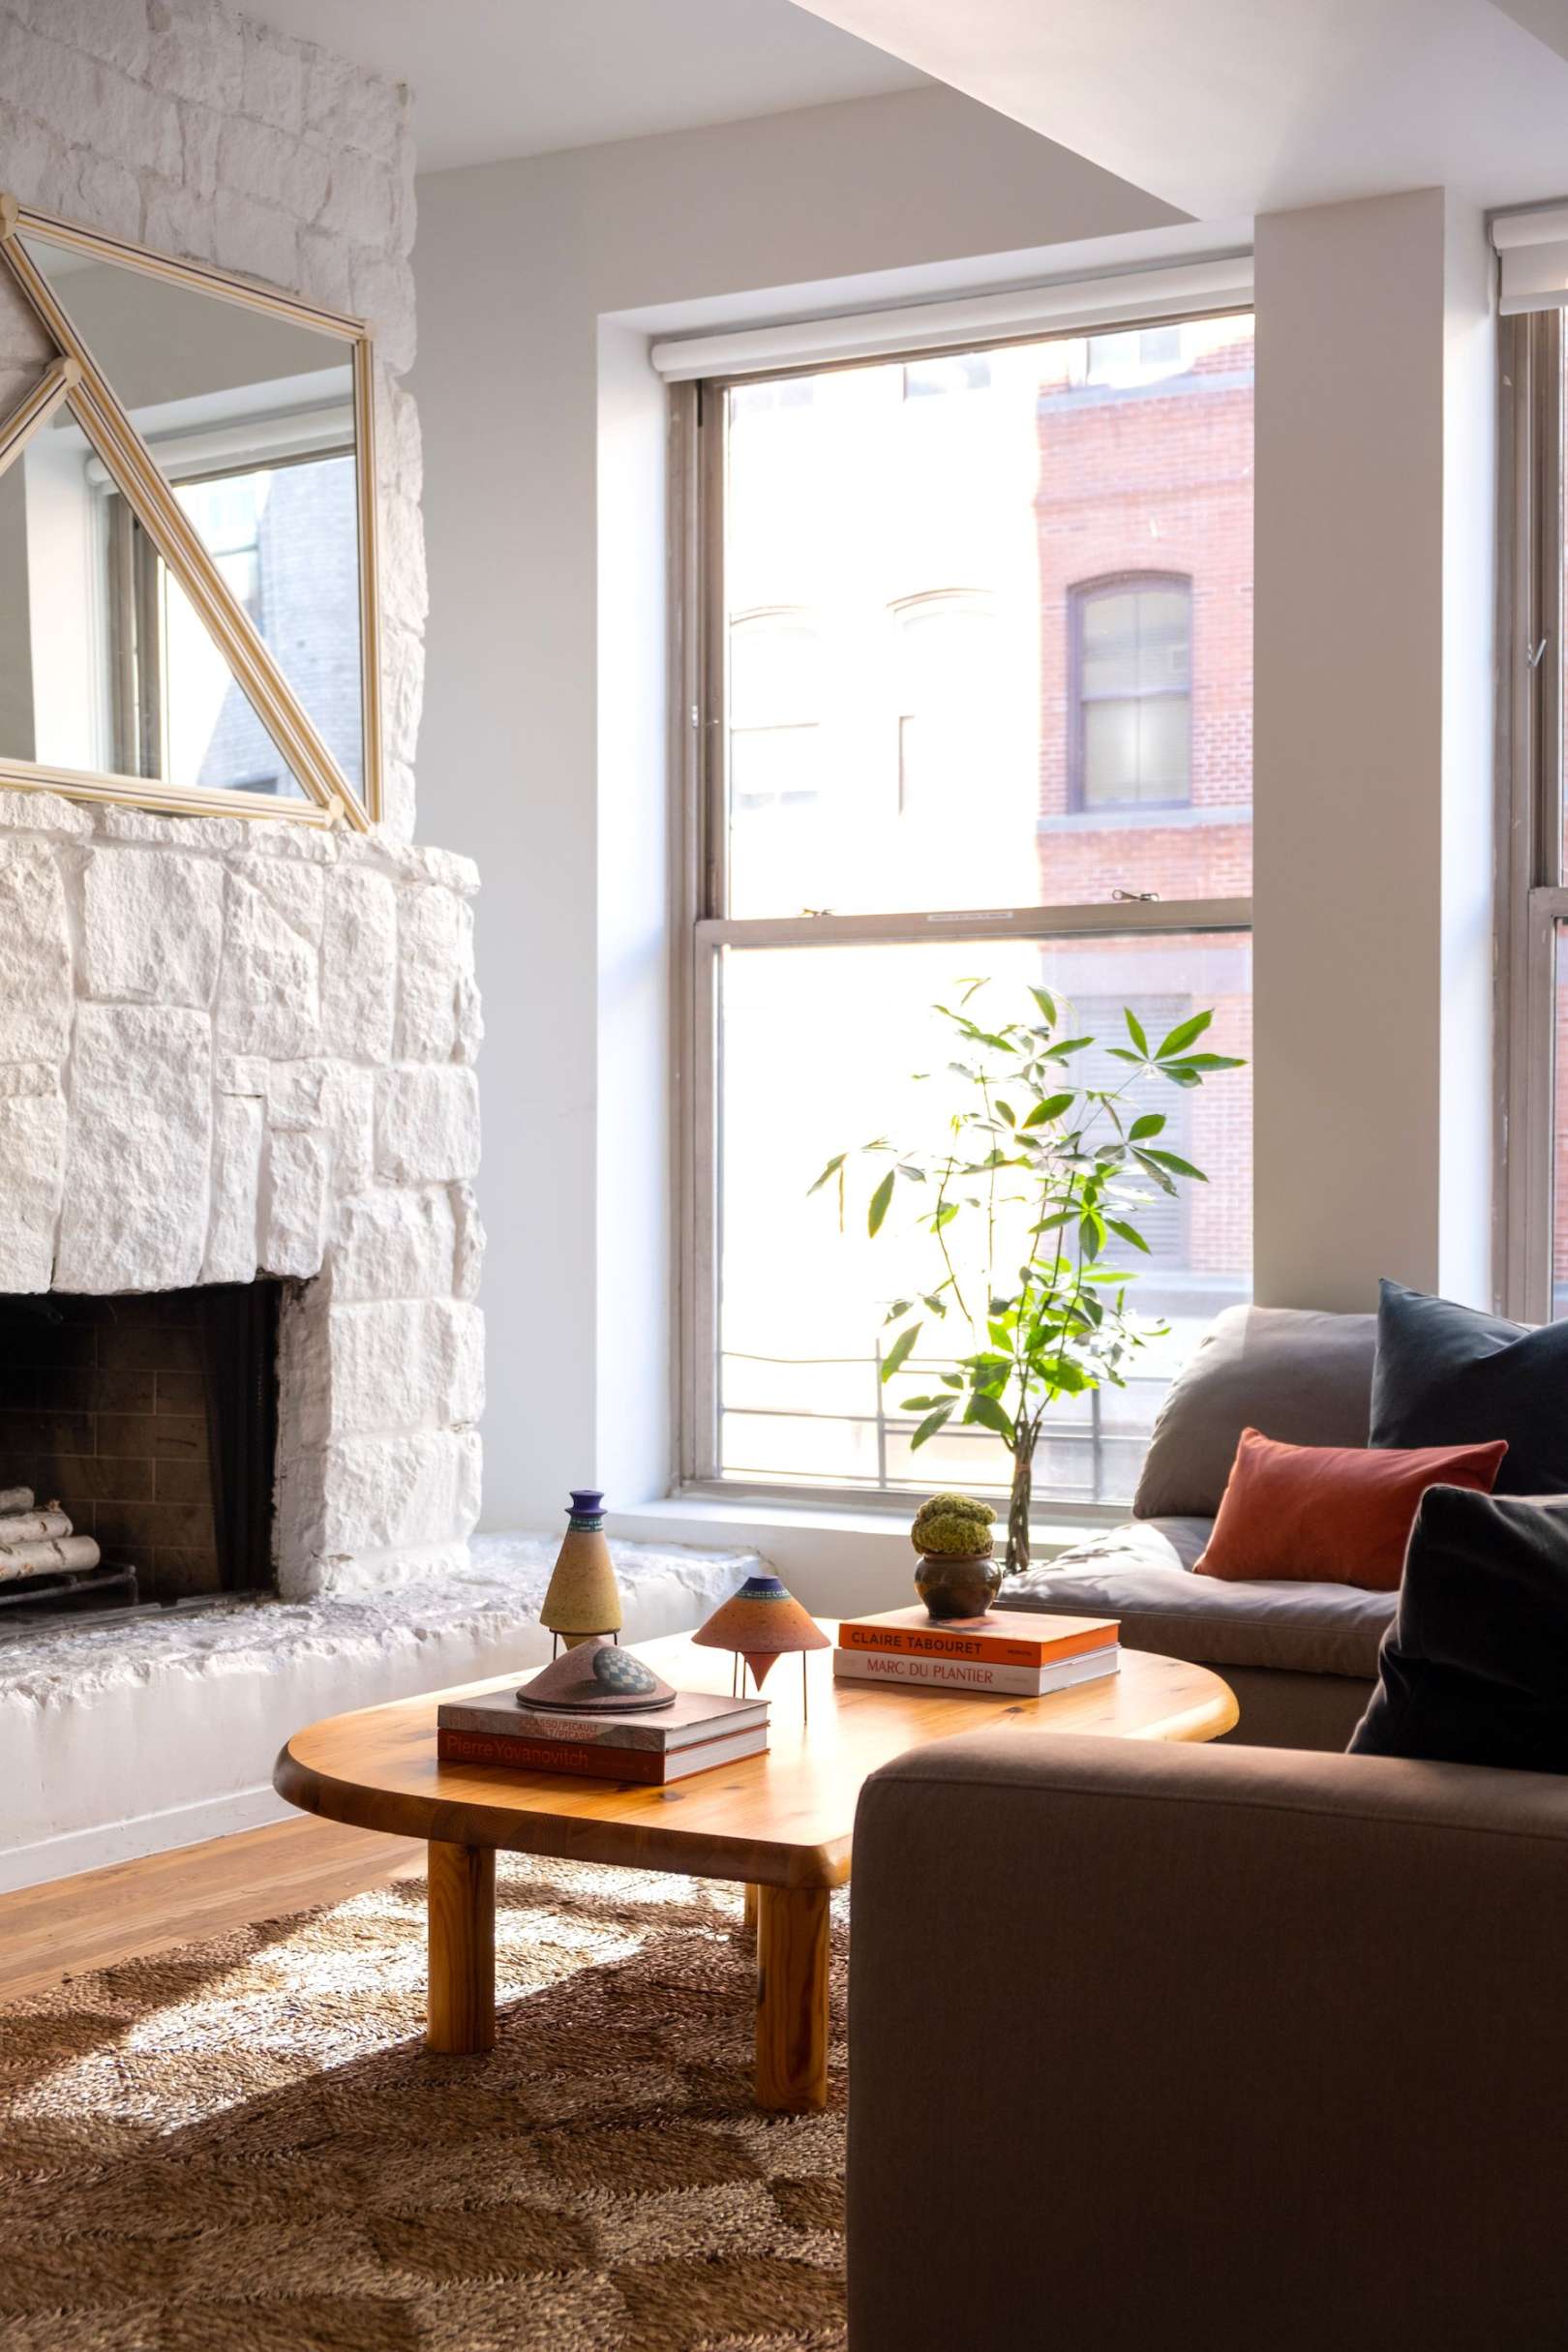 Stylish Painted Fireplaces That Look Modern and Cozy